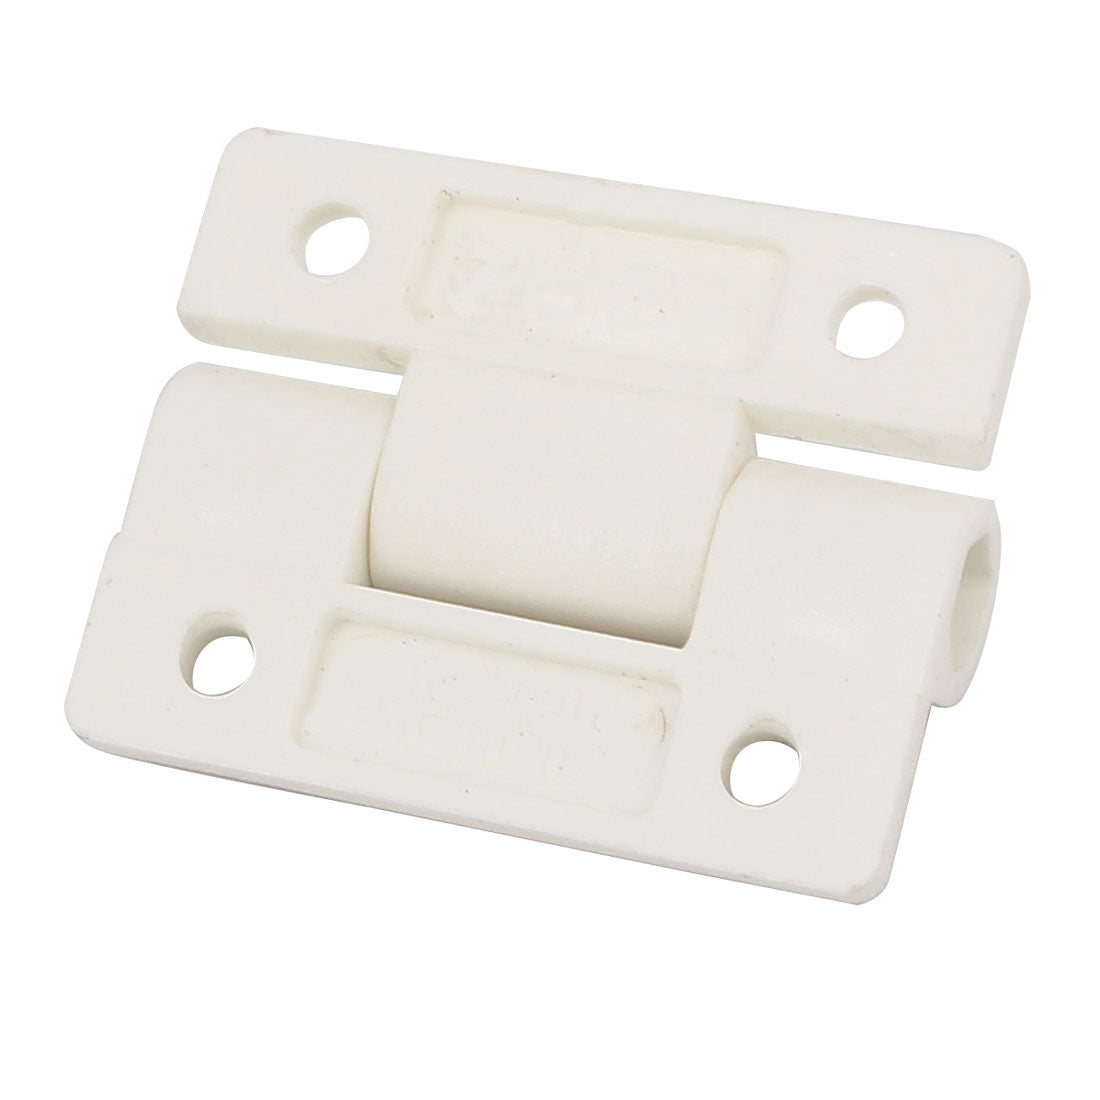 uxcell Uxcell 36mmx28mmx9.5mm Force Adjustable Door Bearing Hinge White